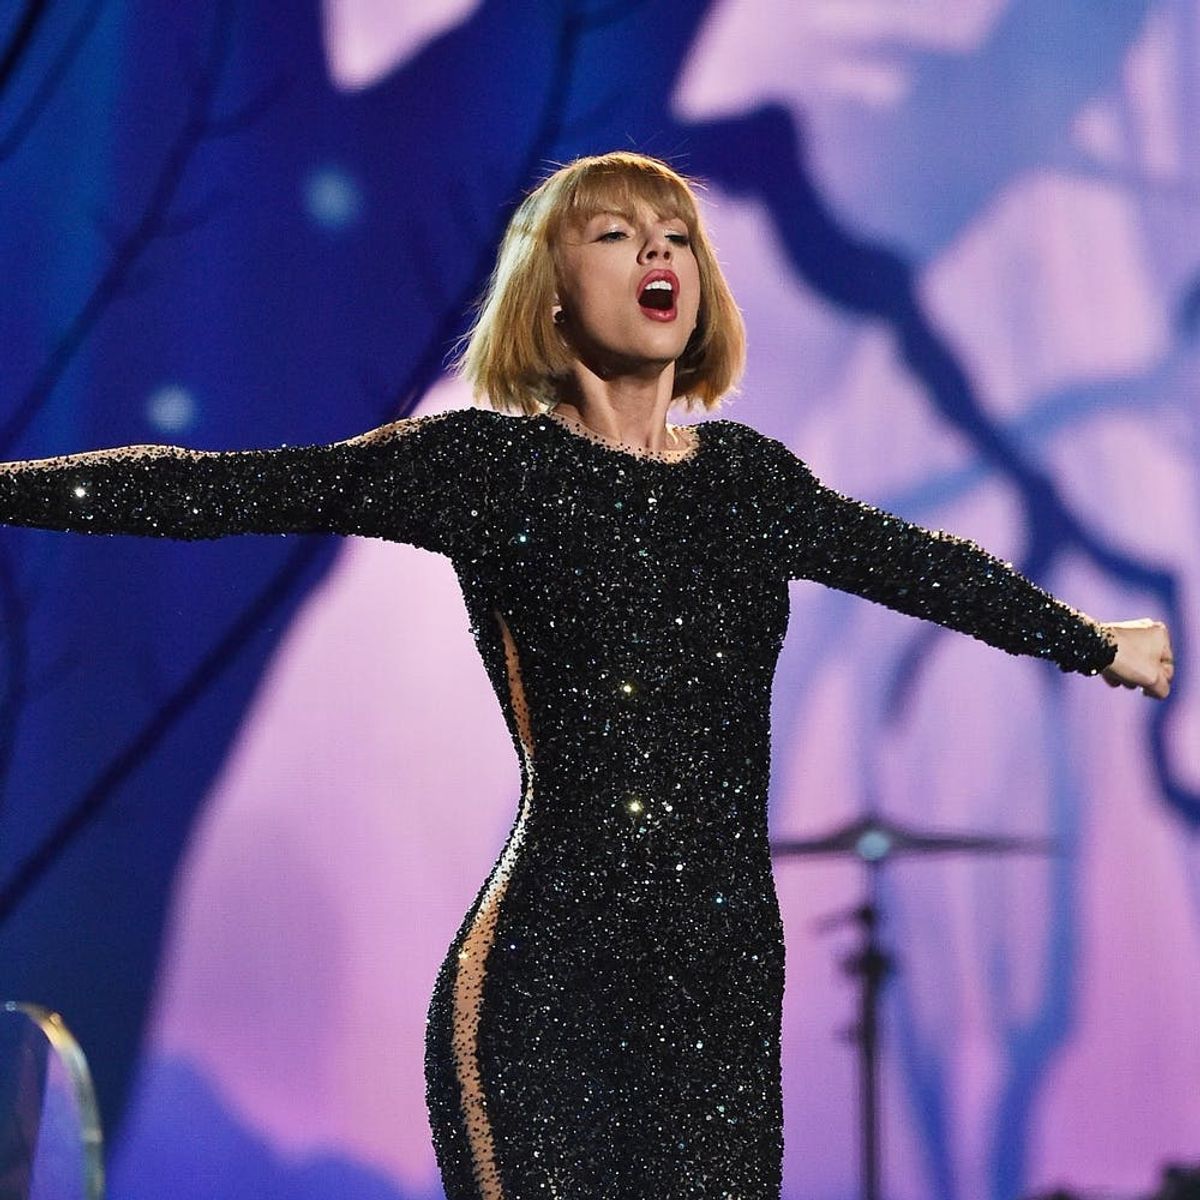 Taylor Swift Fans Are Losing It Over Her Big Album Announcement (and We Relate)